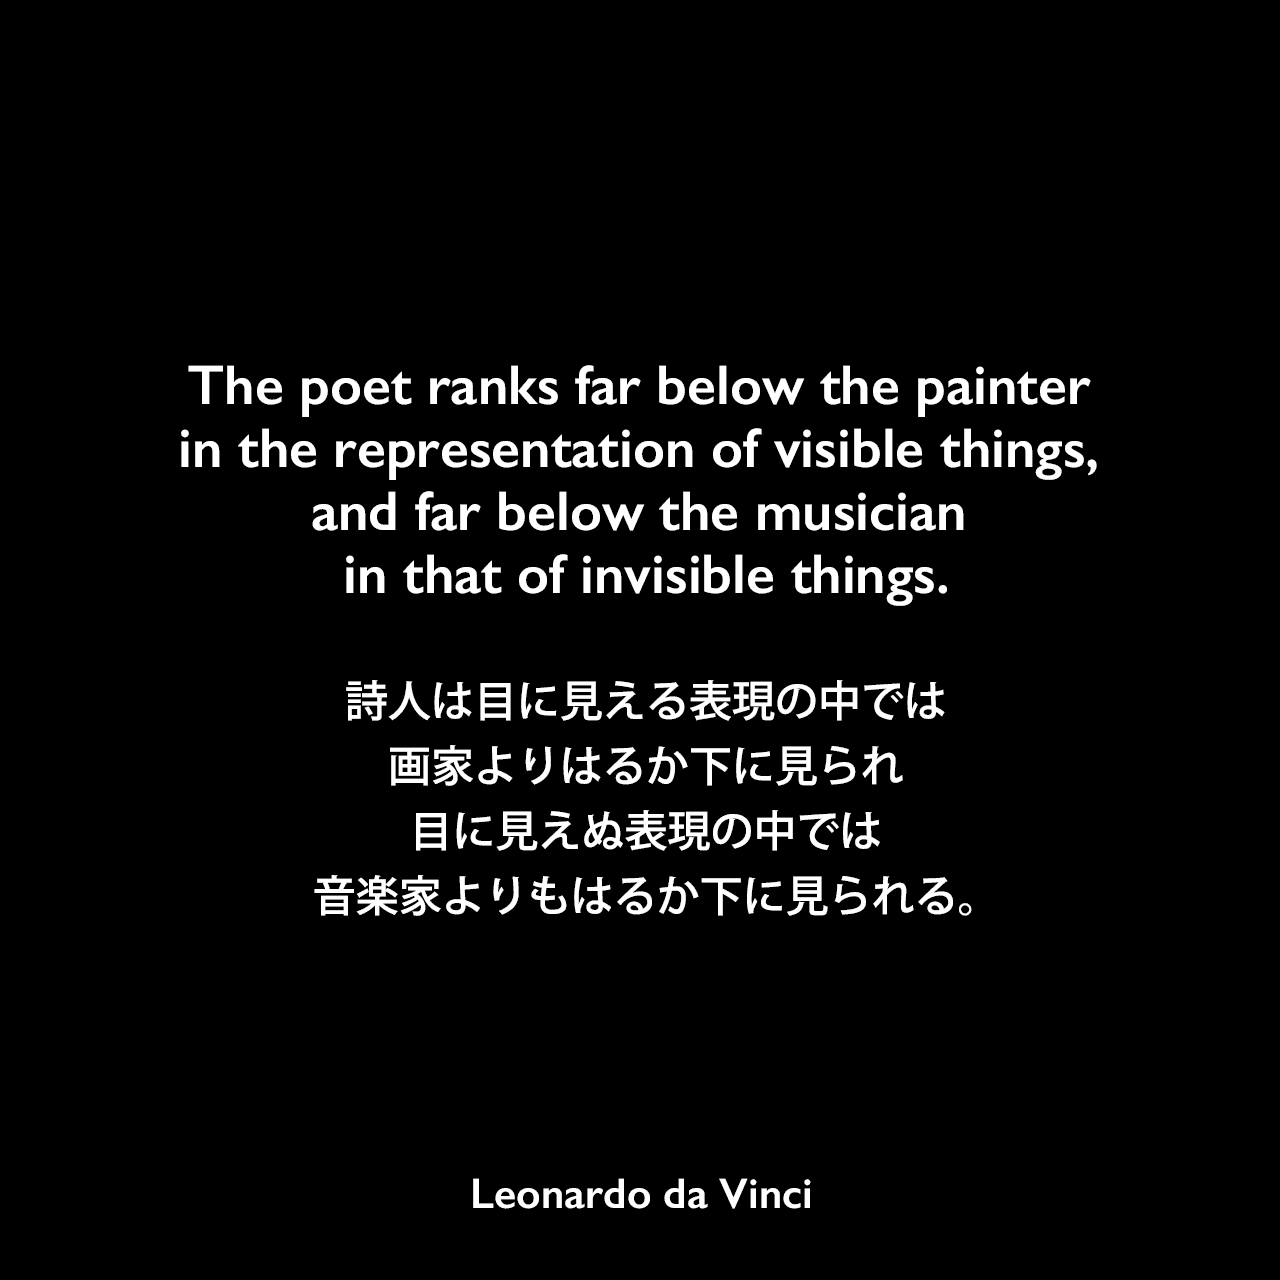 The poet ranks far below the painter in the representation of visible things, and far below the musician in that of invisible things.詩人は目に見える表現の中では画家よりはるか下に見られ、目に見えぬ表現の中では音楽家よりもはるか下に見られる。Leonardo da Vinci